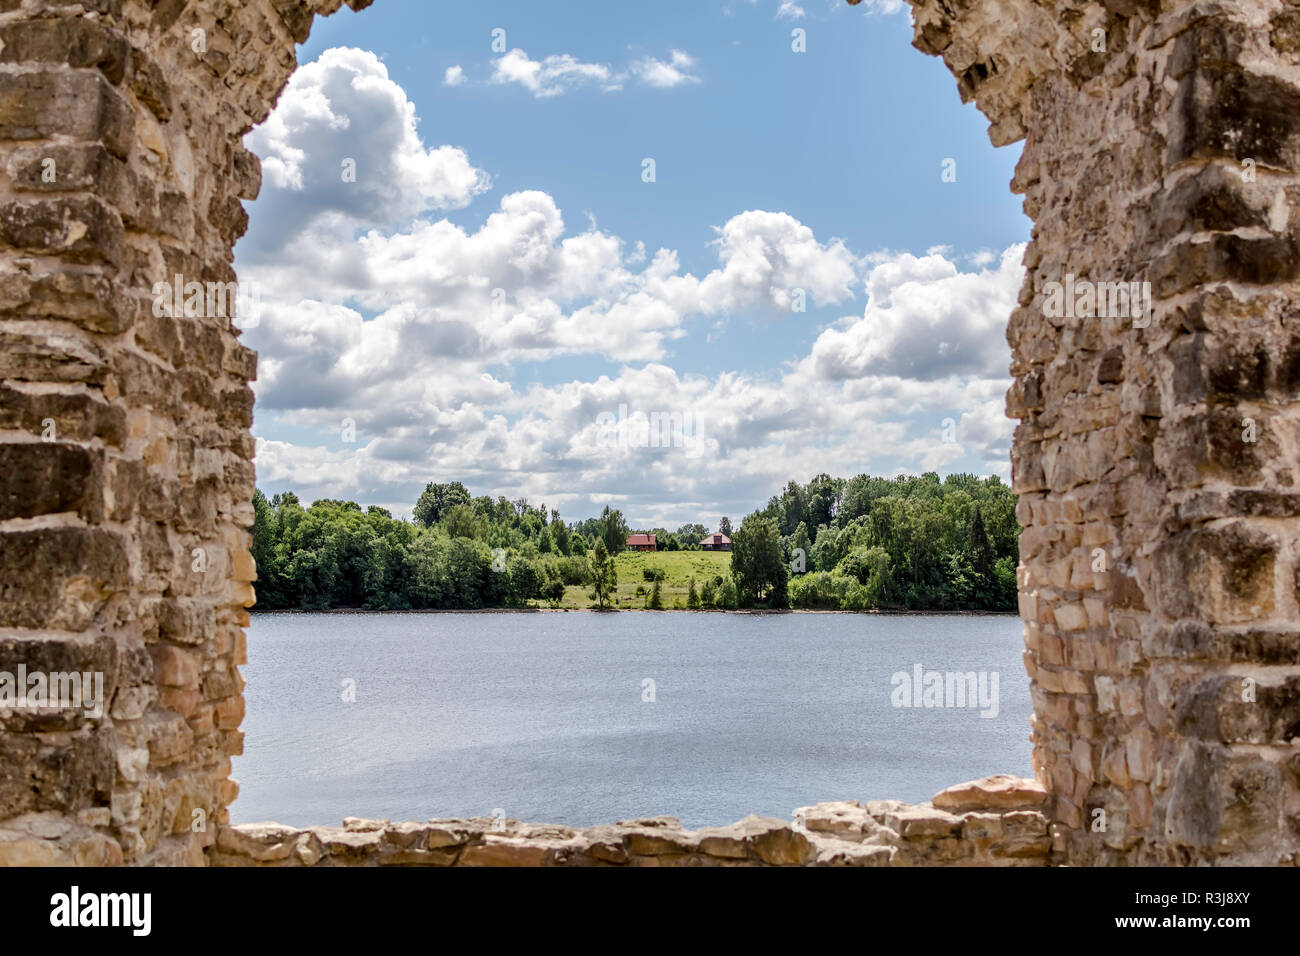 View to the rural cottage at river bank through ruins of Koknese Castle - one of the largest and most significant medieval castles on Latvian territor Stock Photo